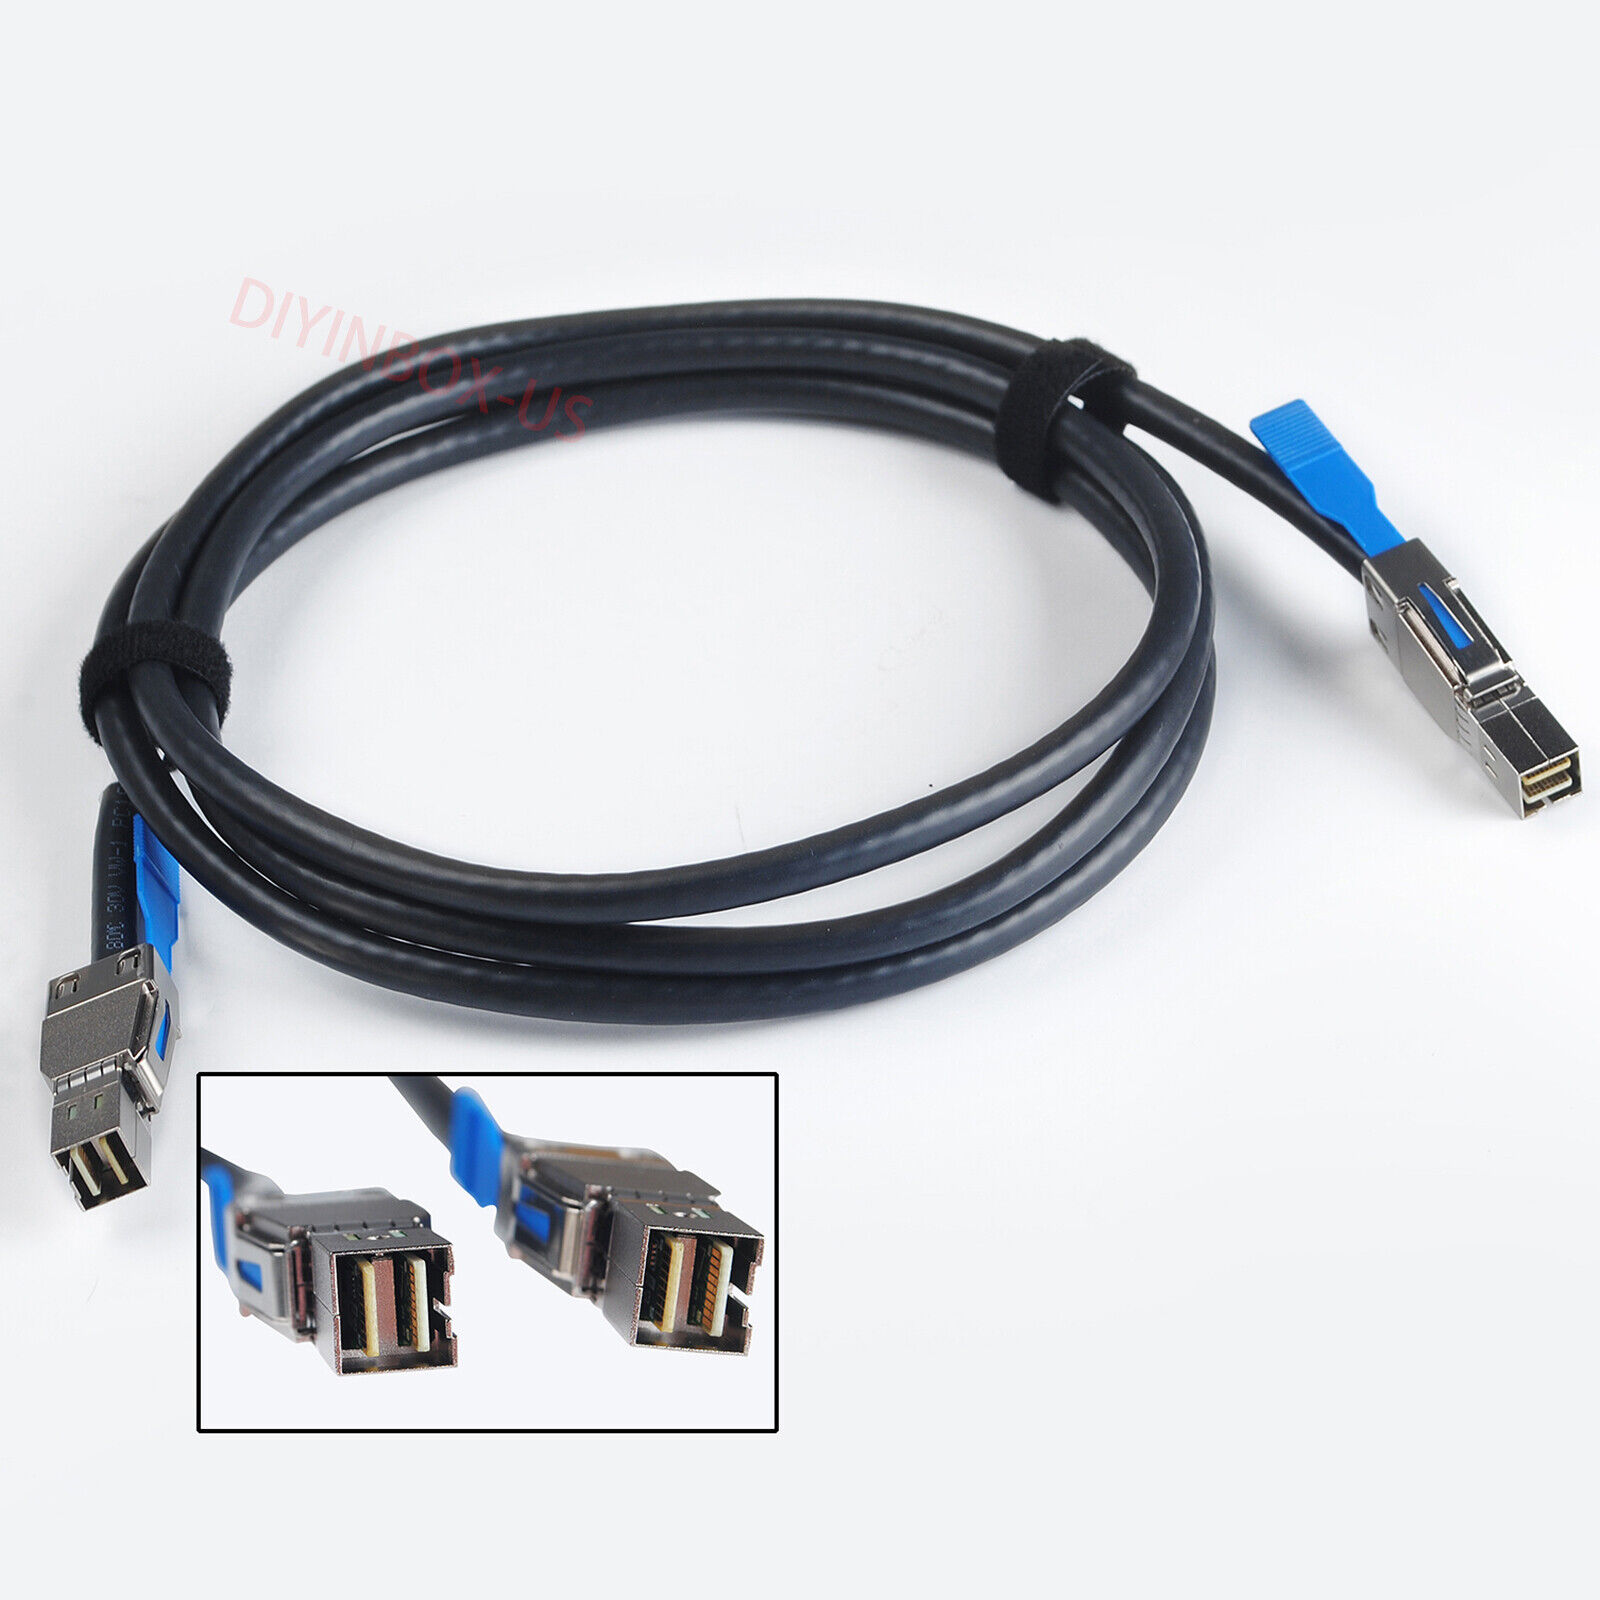 12GBs SFF-8644 to SFF-8644 Mini SAS HD Cable For Dell 0GYK61 MD1420 MD3420 6.6FT